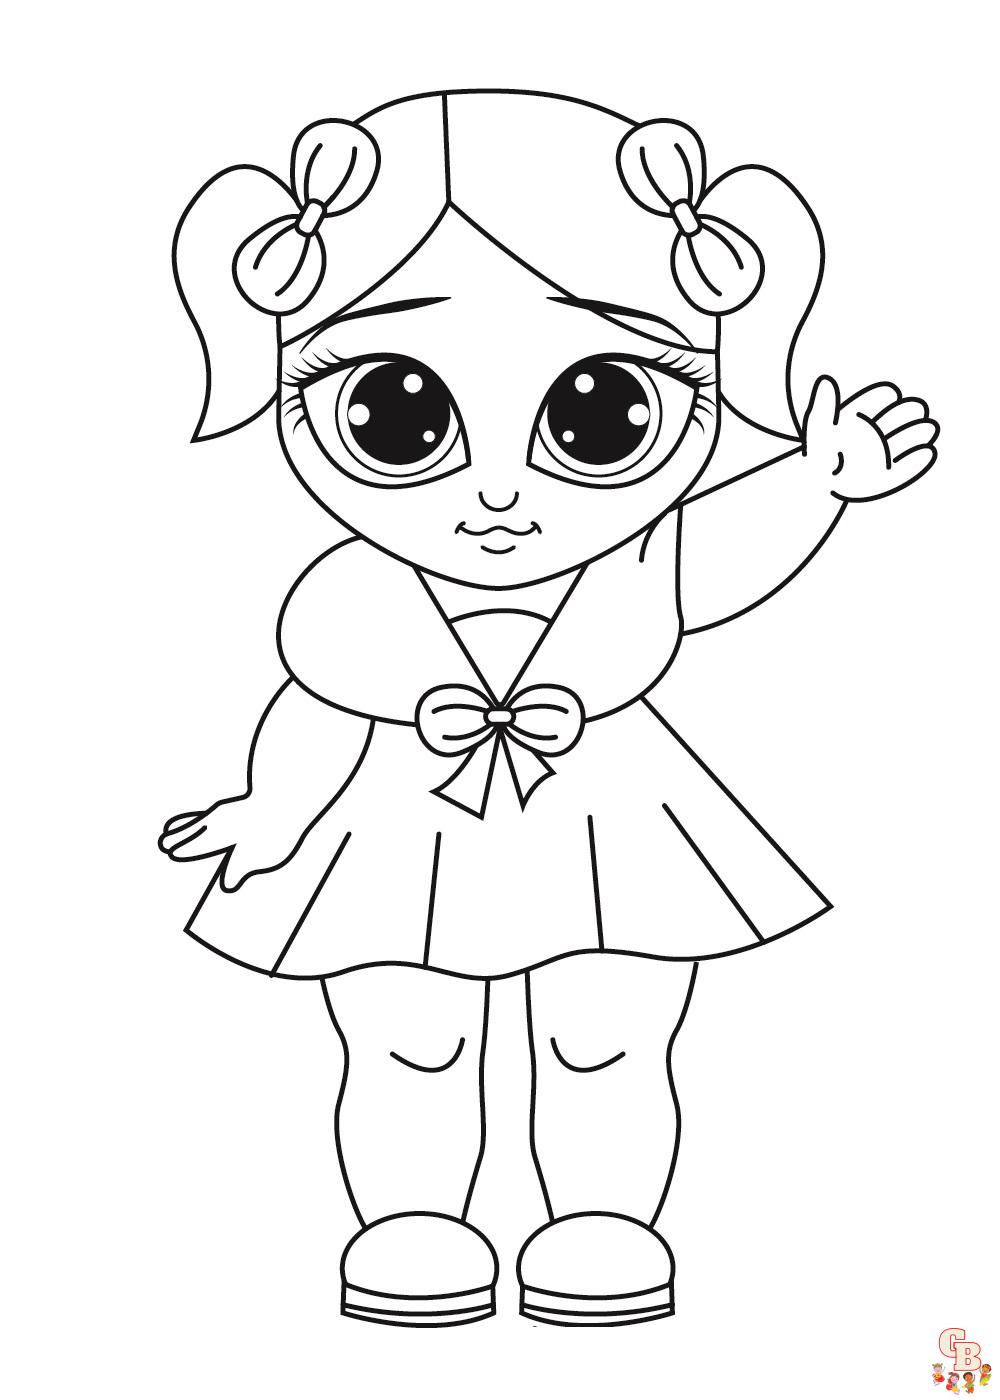 Cute Baby Alive Doll 塗り絵 printable 2